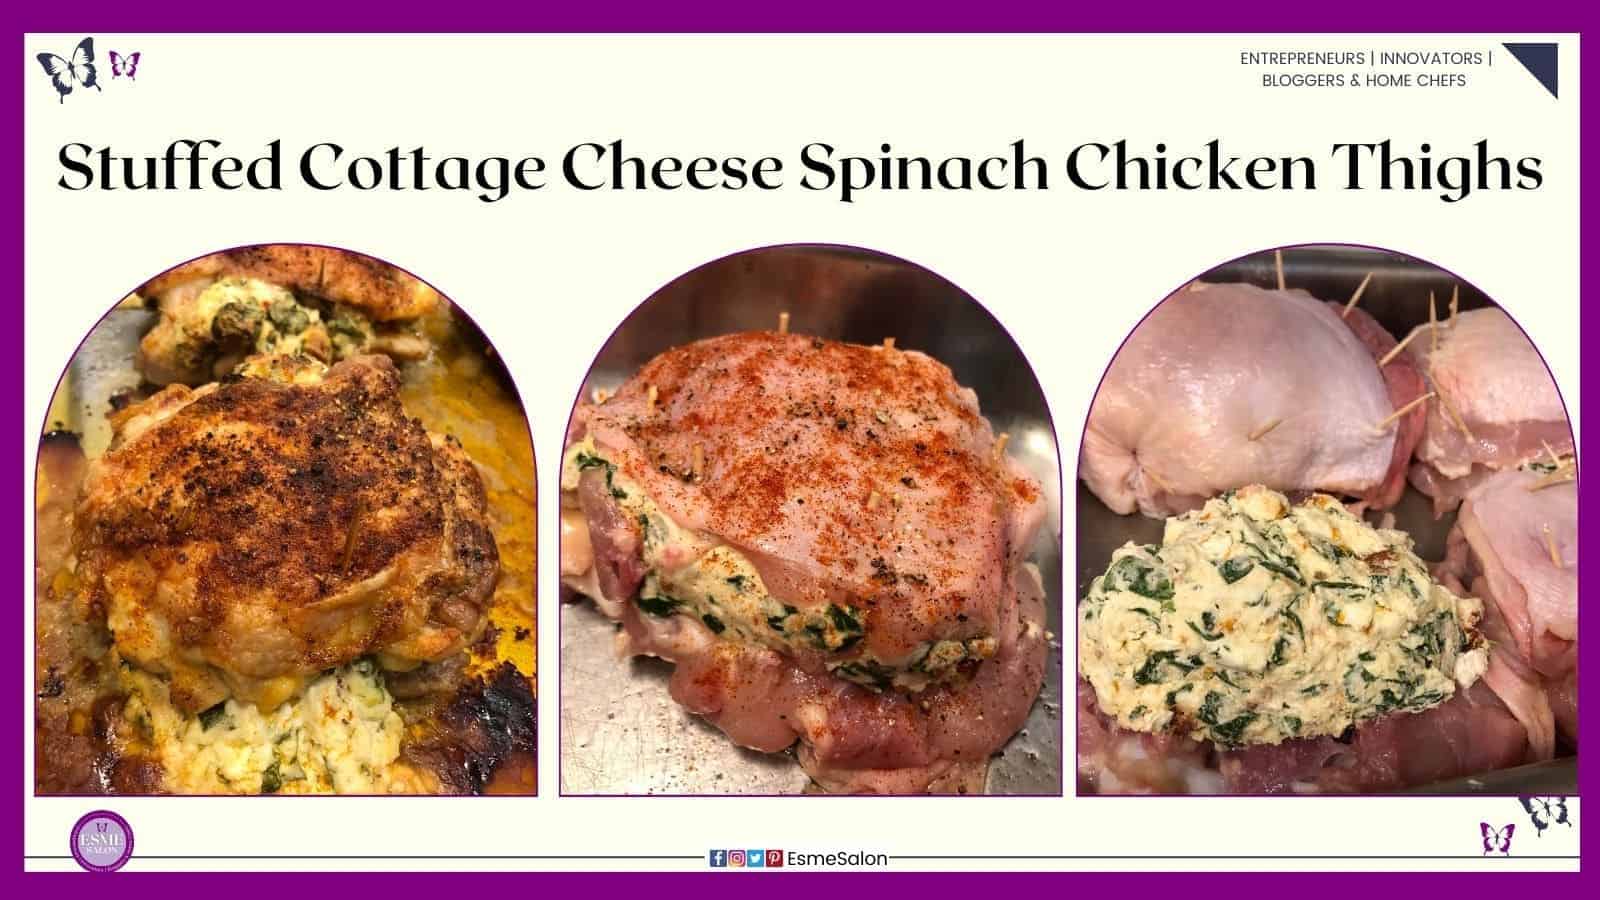 an image of Stuffed Cottage Cheese Spinach Chicken Thighs baked, spiced but still raw, and raw with cheese filling